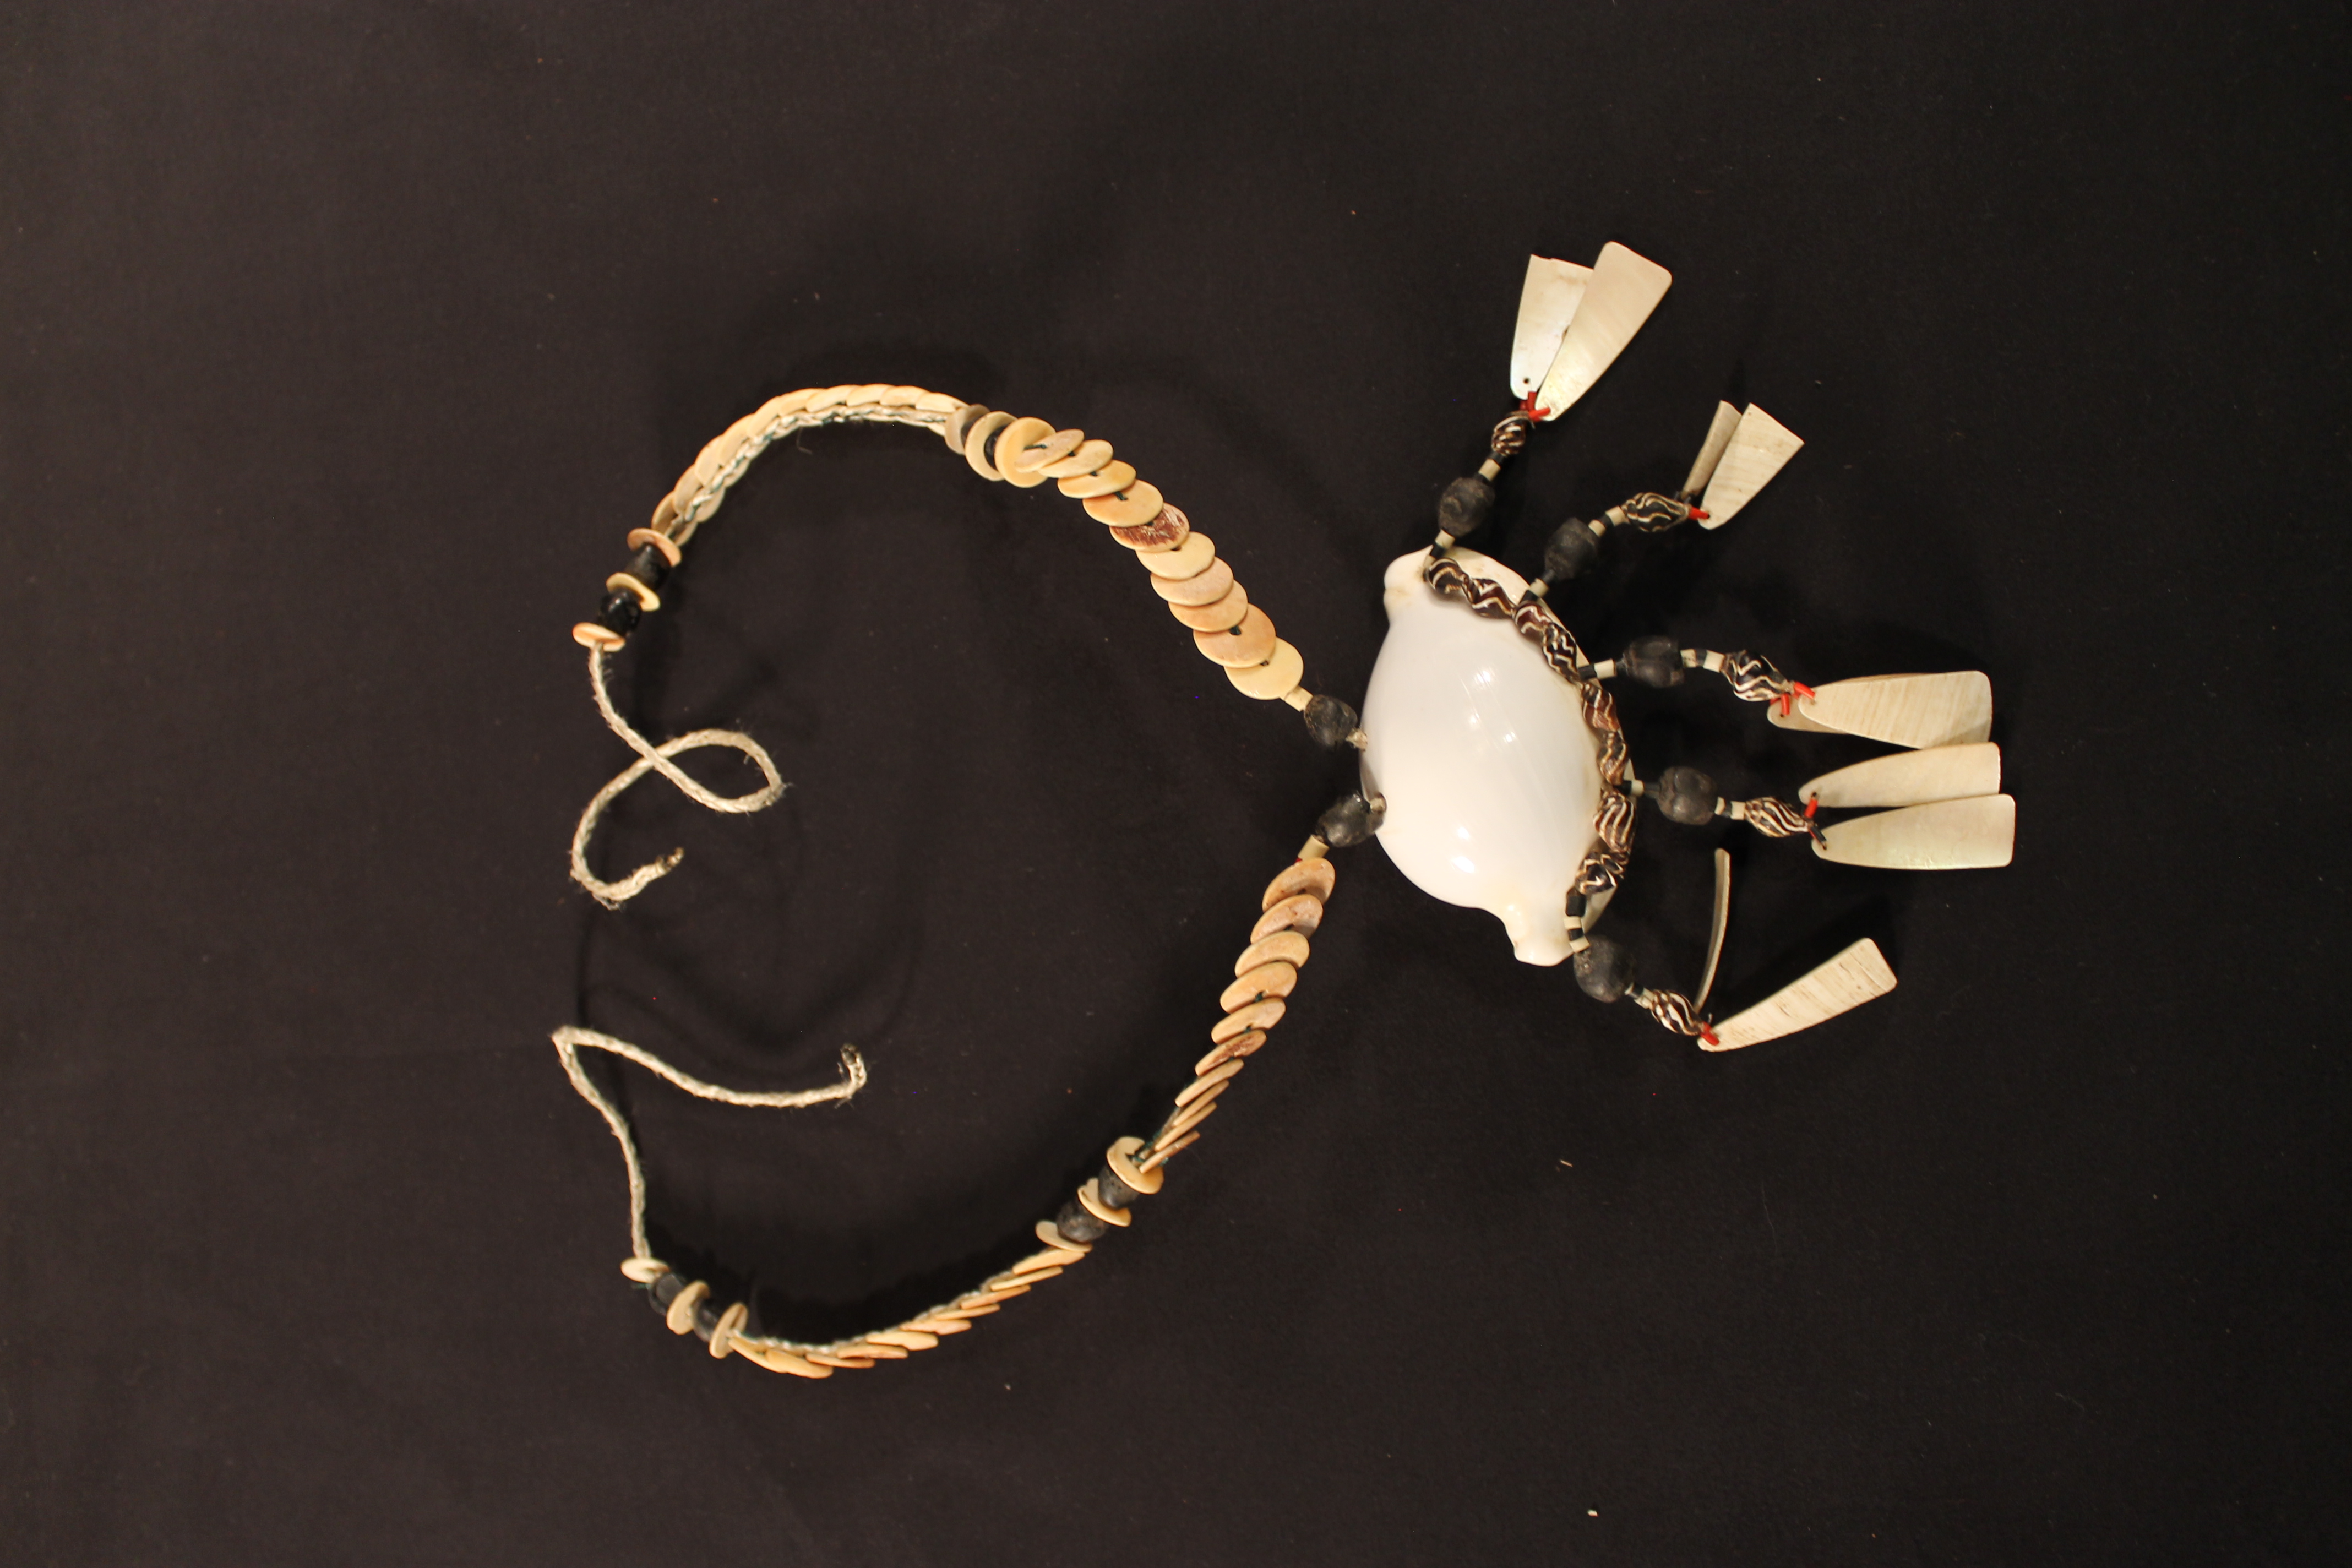 Shell necklace with a large shell in the center that has tassels hanging off that have shells on them.